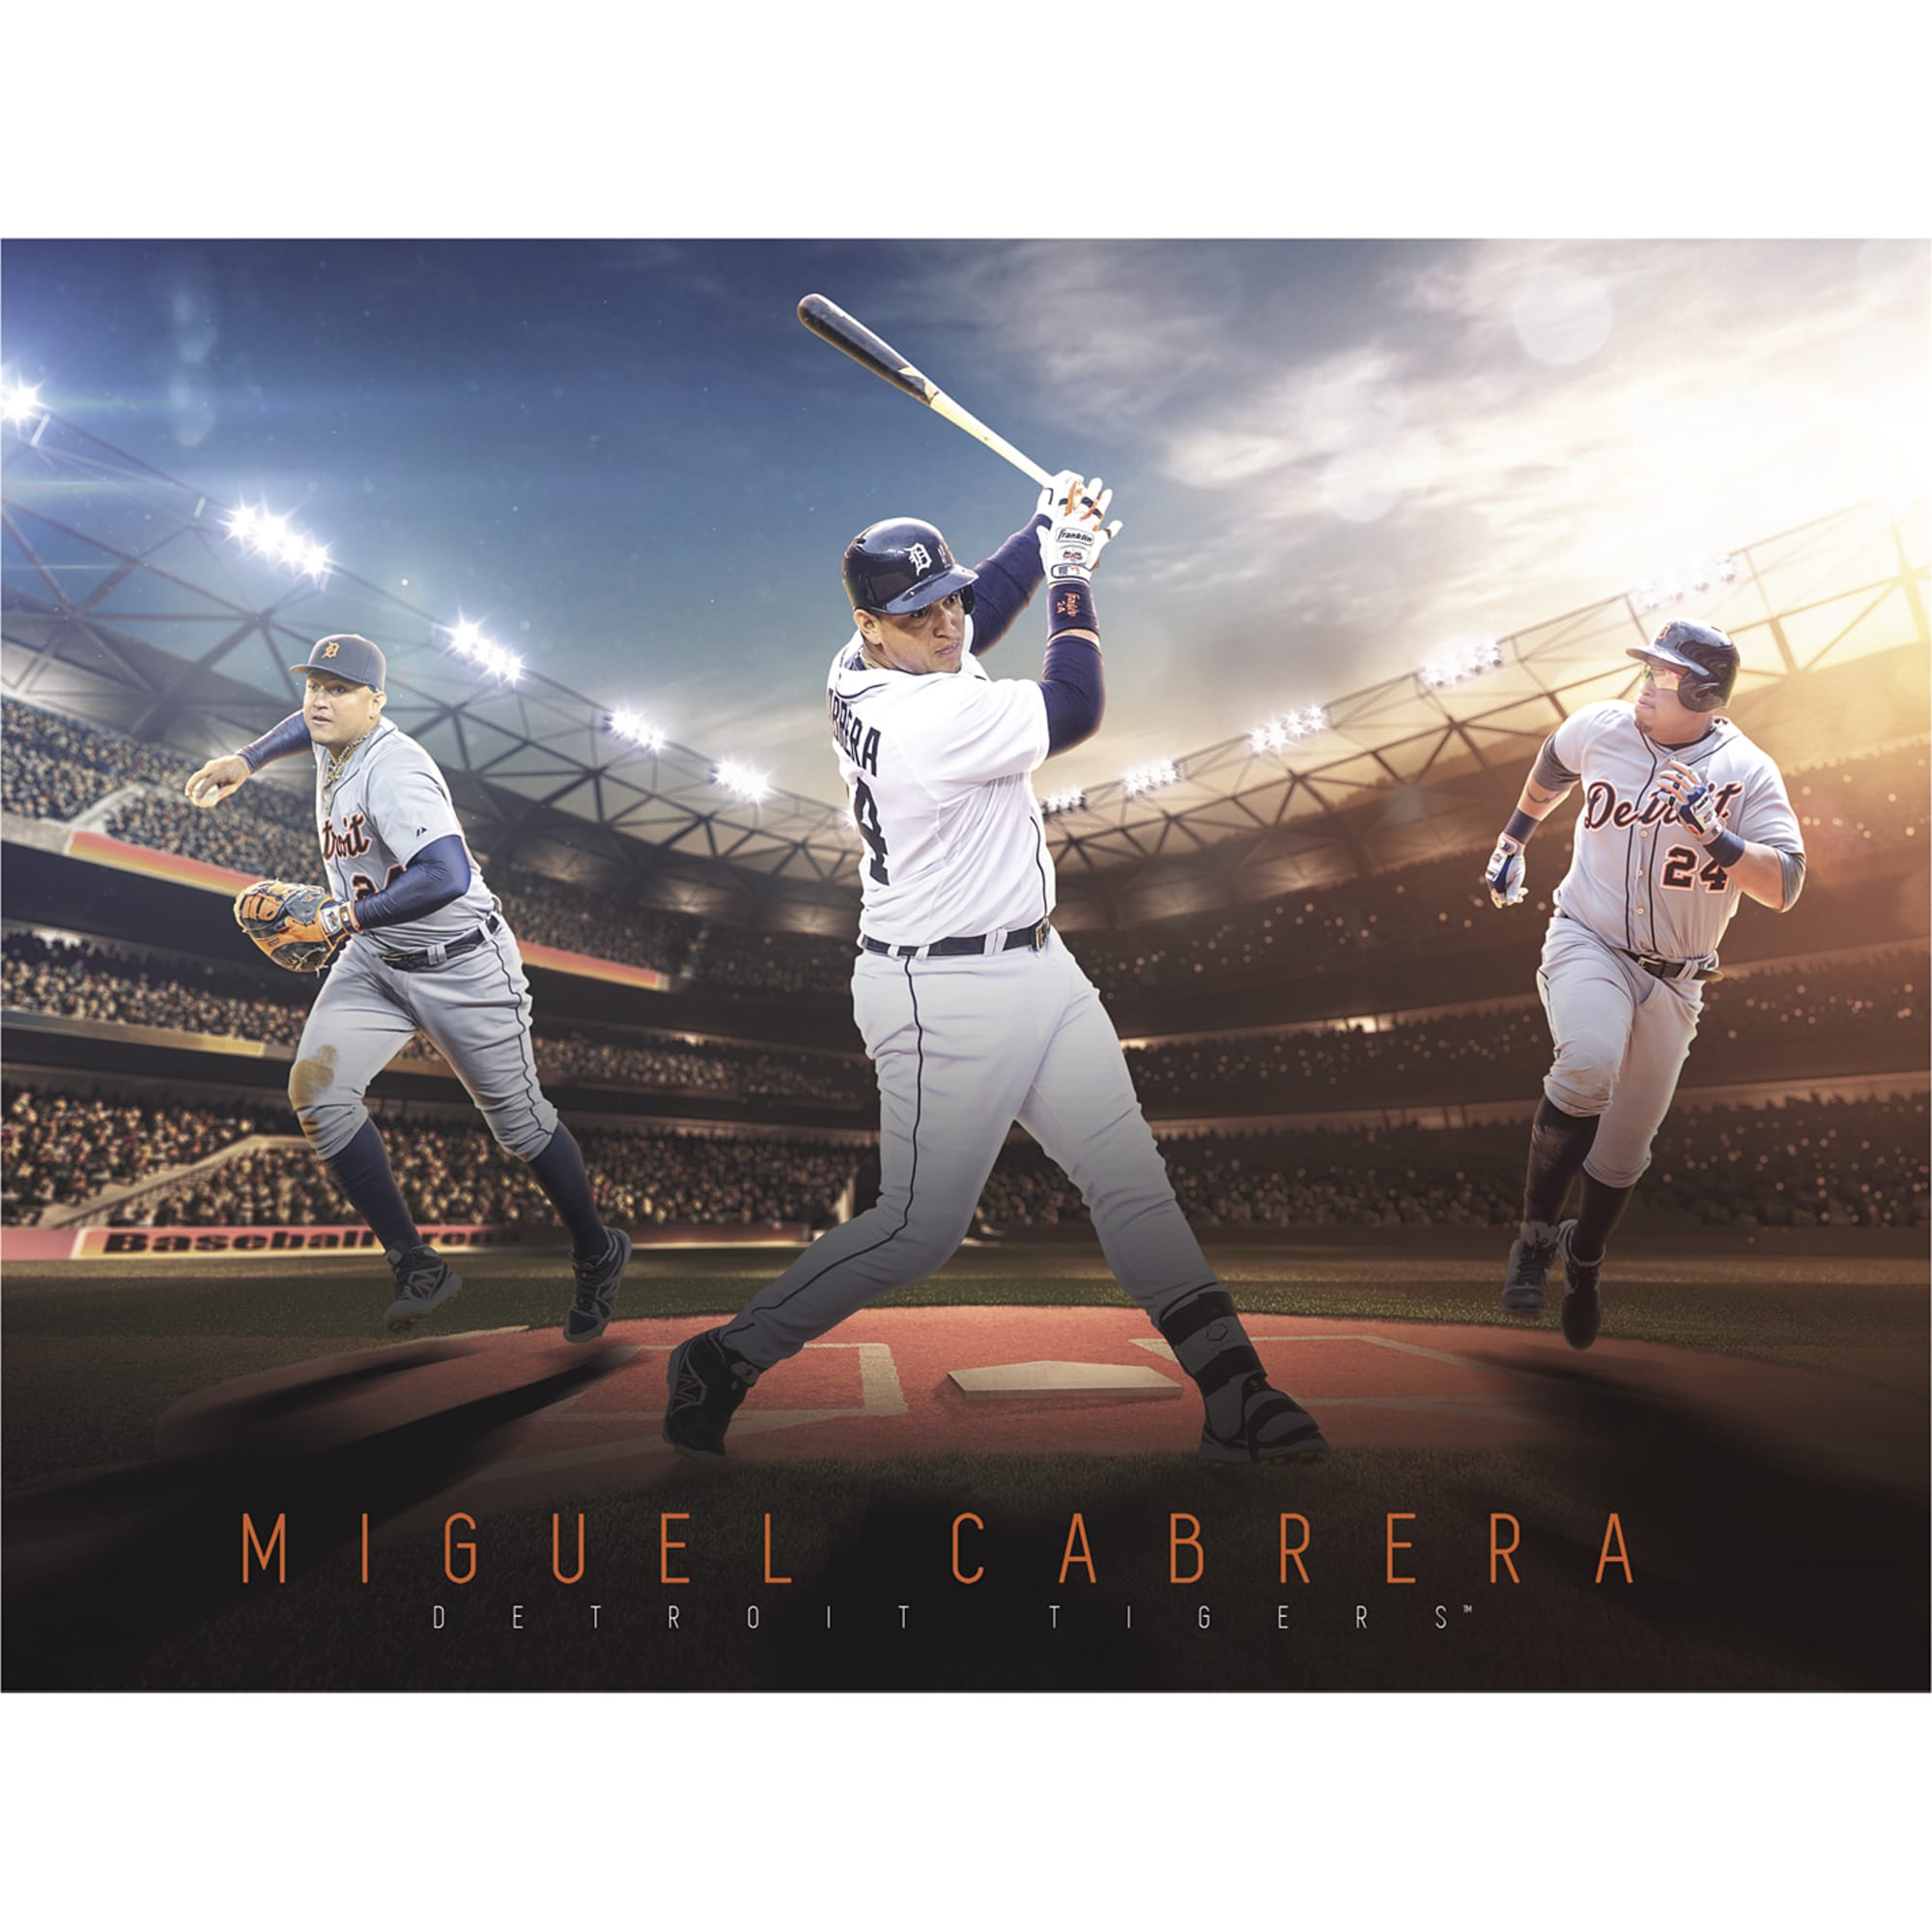 Fanatics Authentic Miguel Cabrera Detroit Tigers Framed 15 x 17 Impact Player Collage with A Piece of Game-Used Baseball - Limited Edition 500